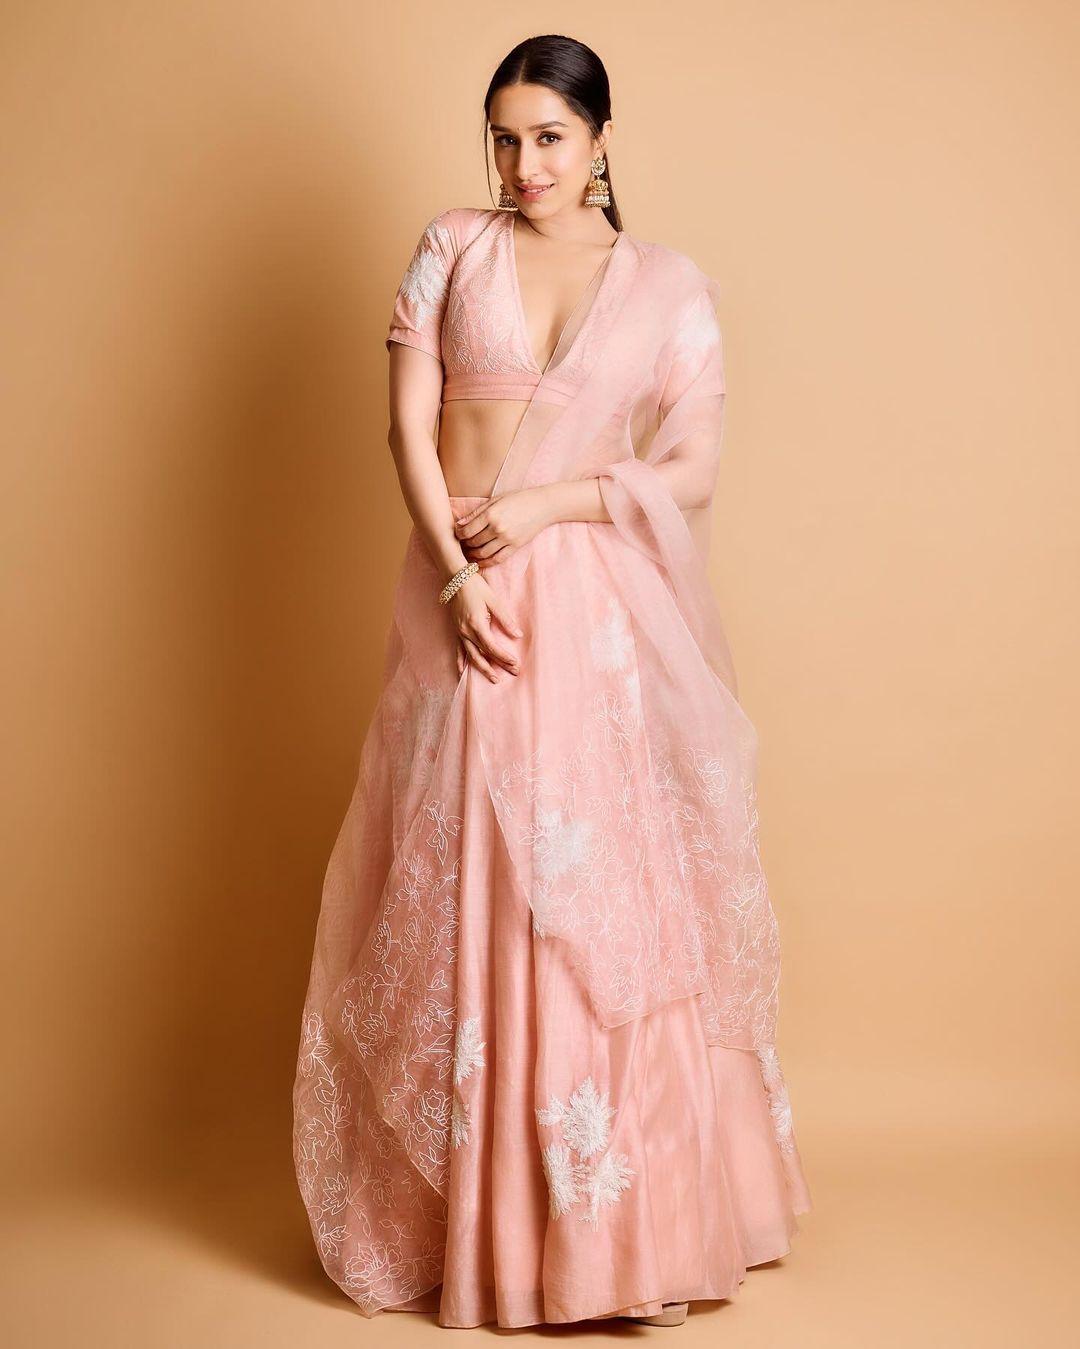 The actress shared this stunning look in a gorgeous lehenga adorned with white flower embroidery and a mix of pastel hues